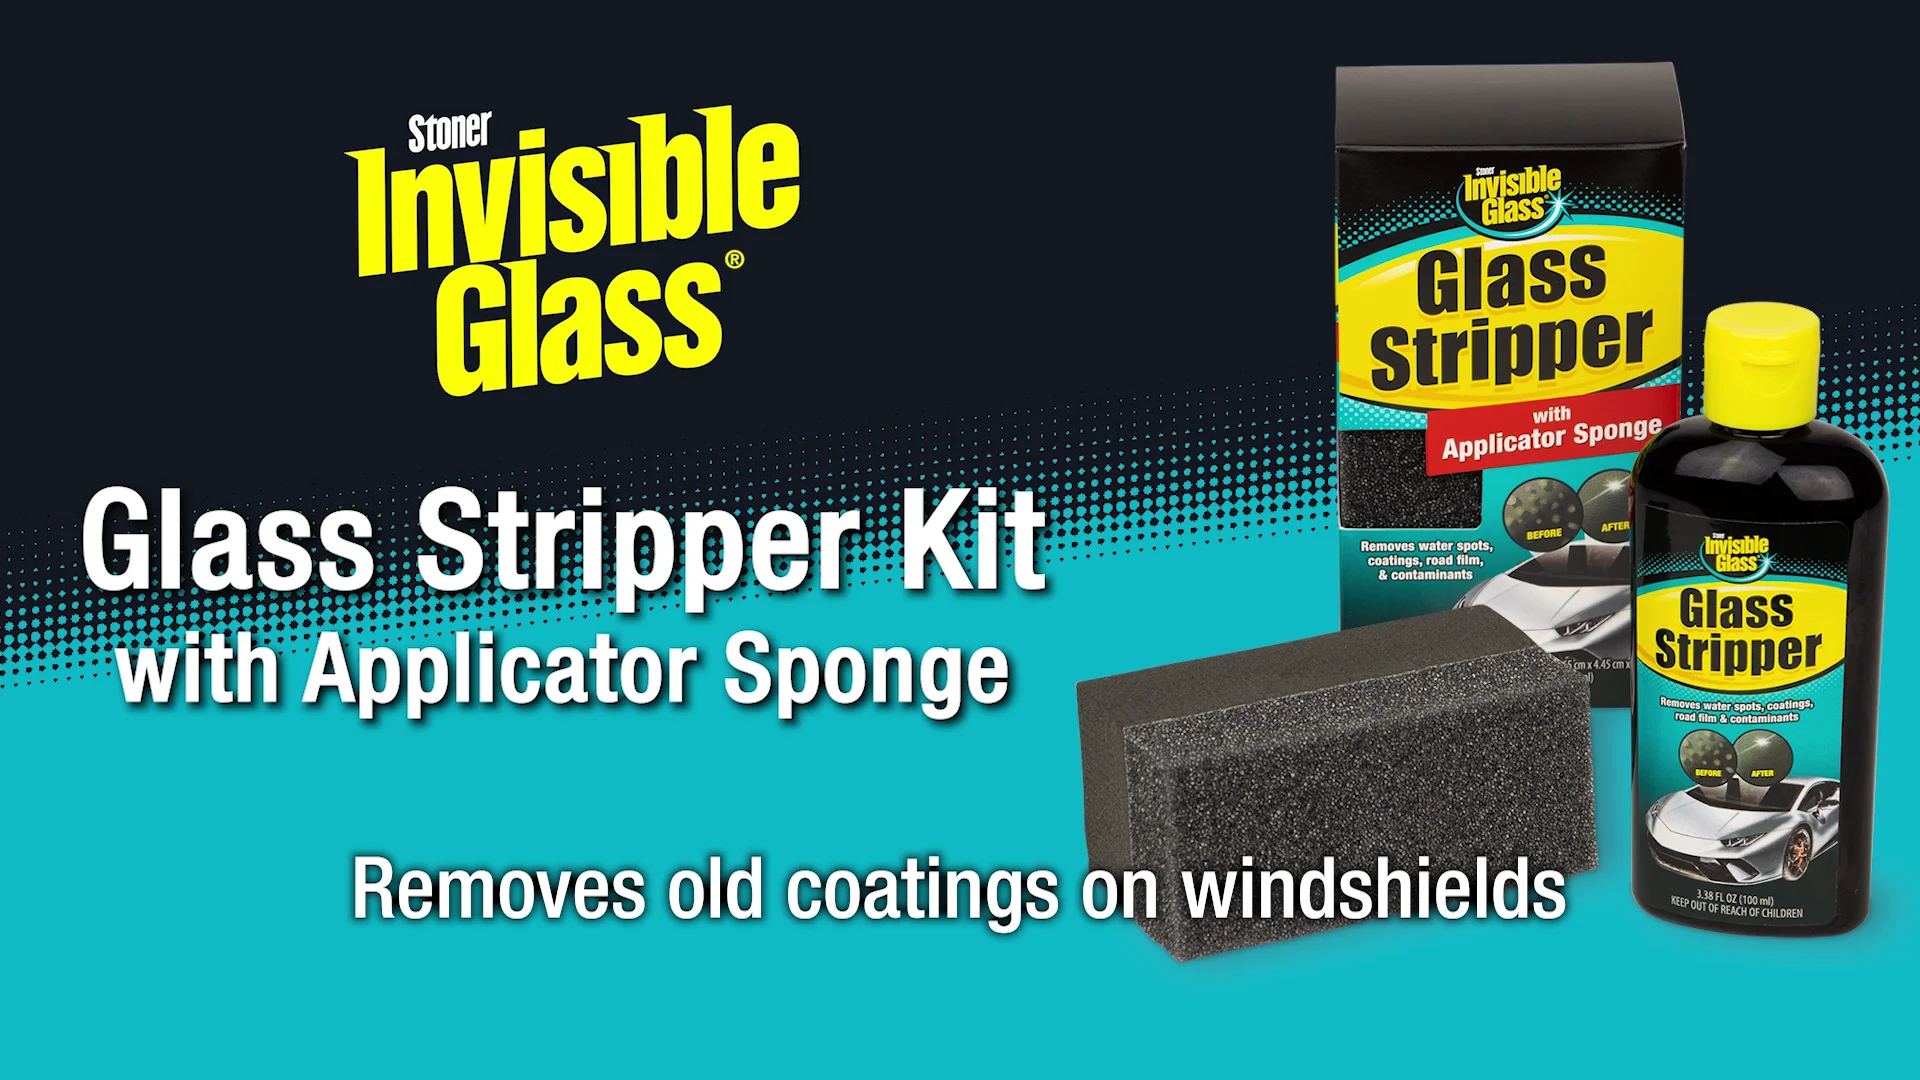 Invisible Glass 91411 3.38-Ounce Glass Stripper Water Spot Remover Kit New